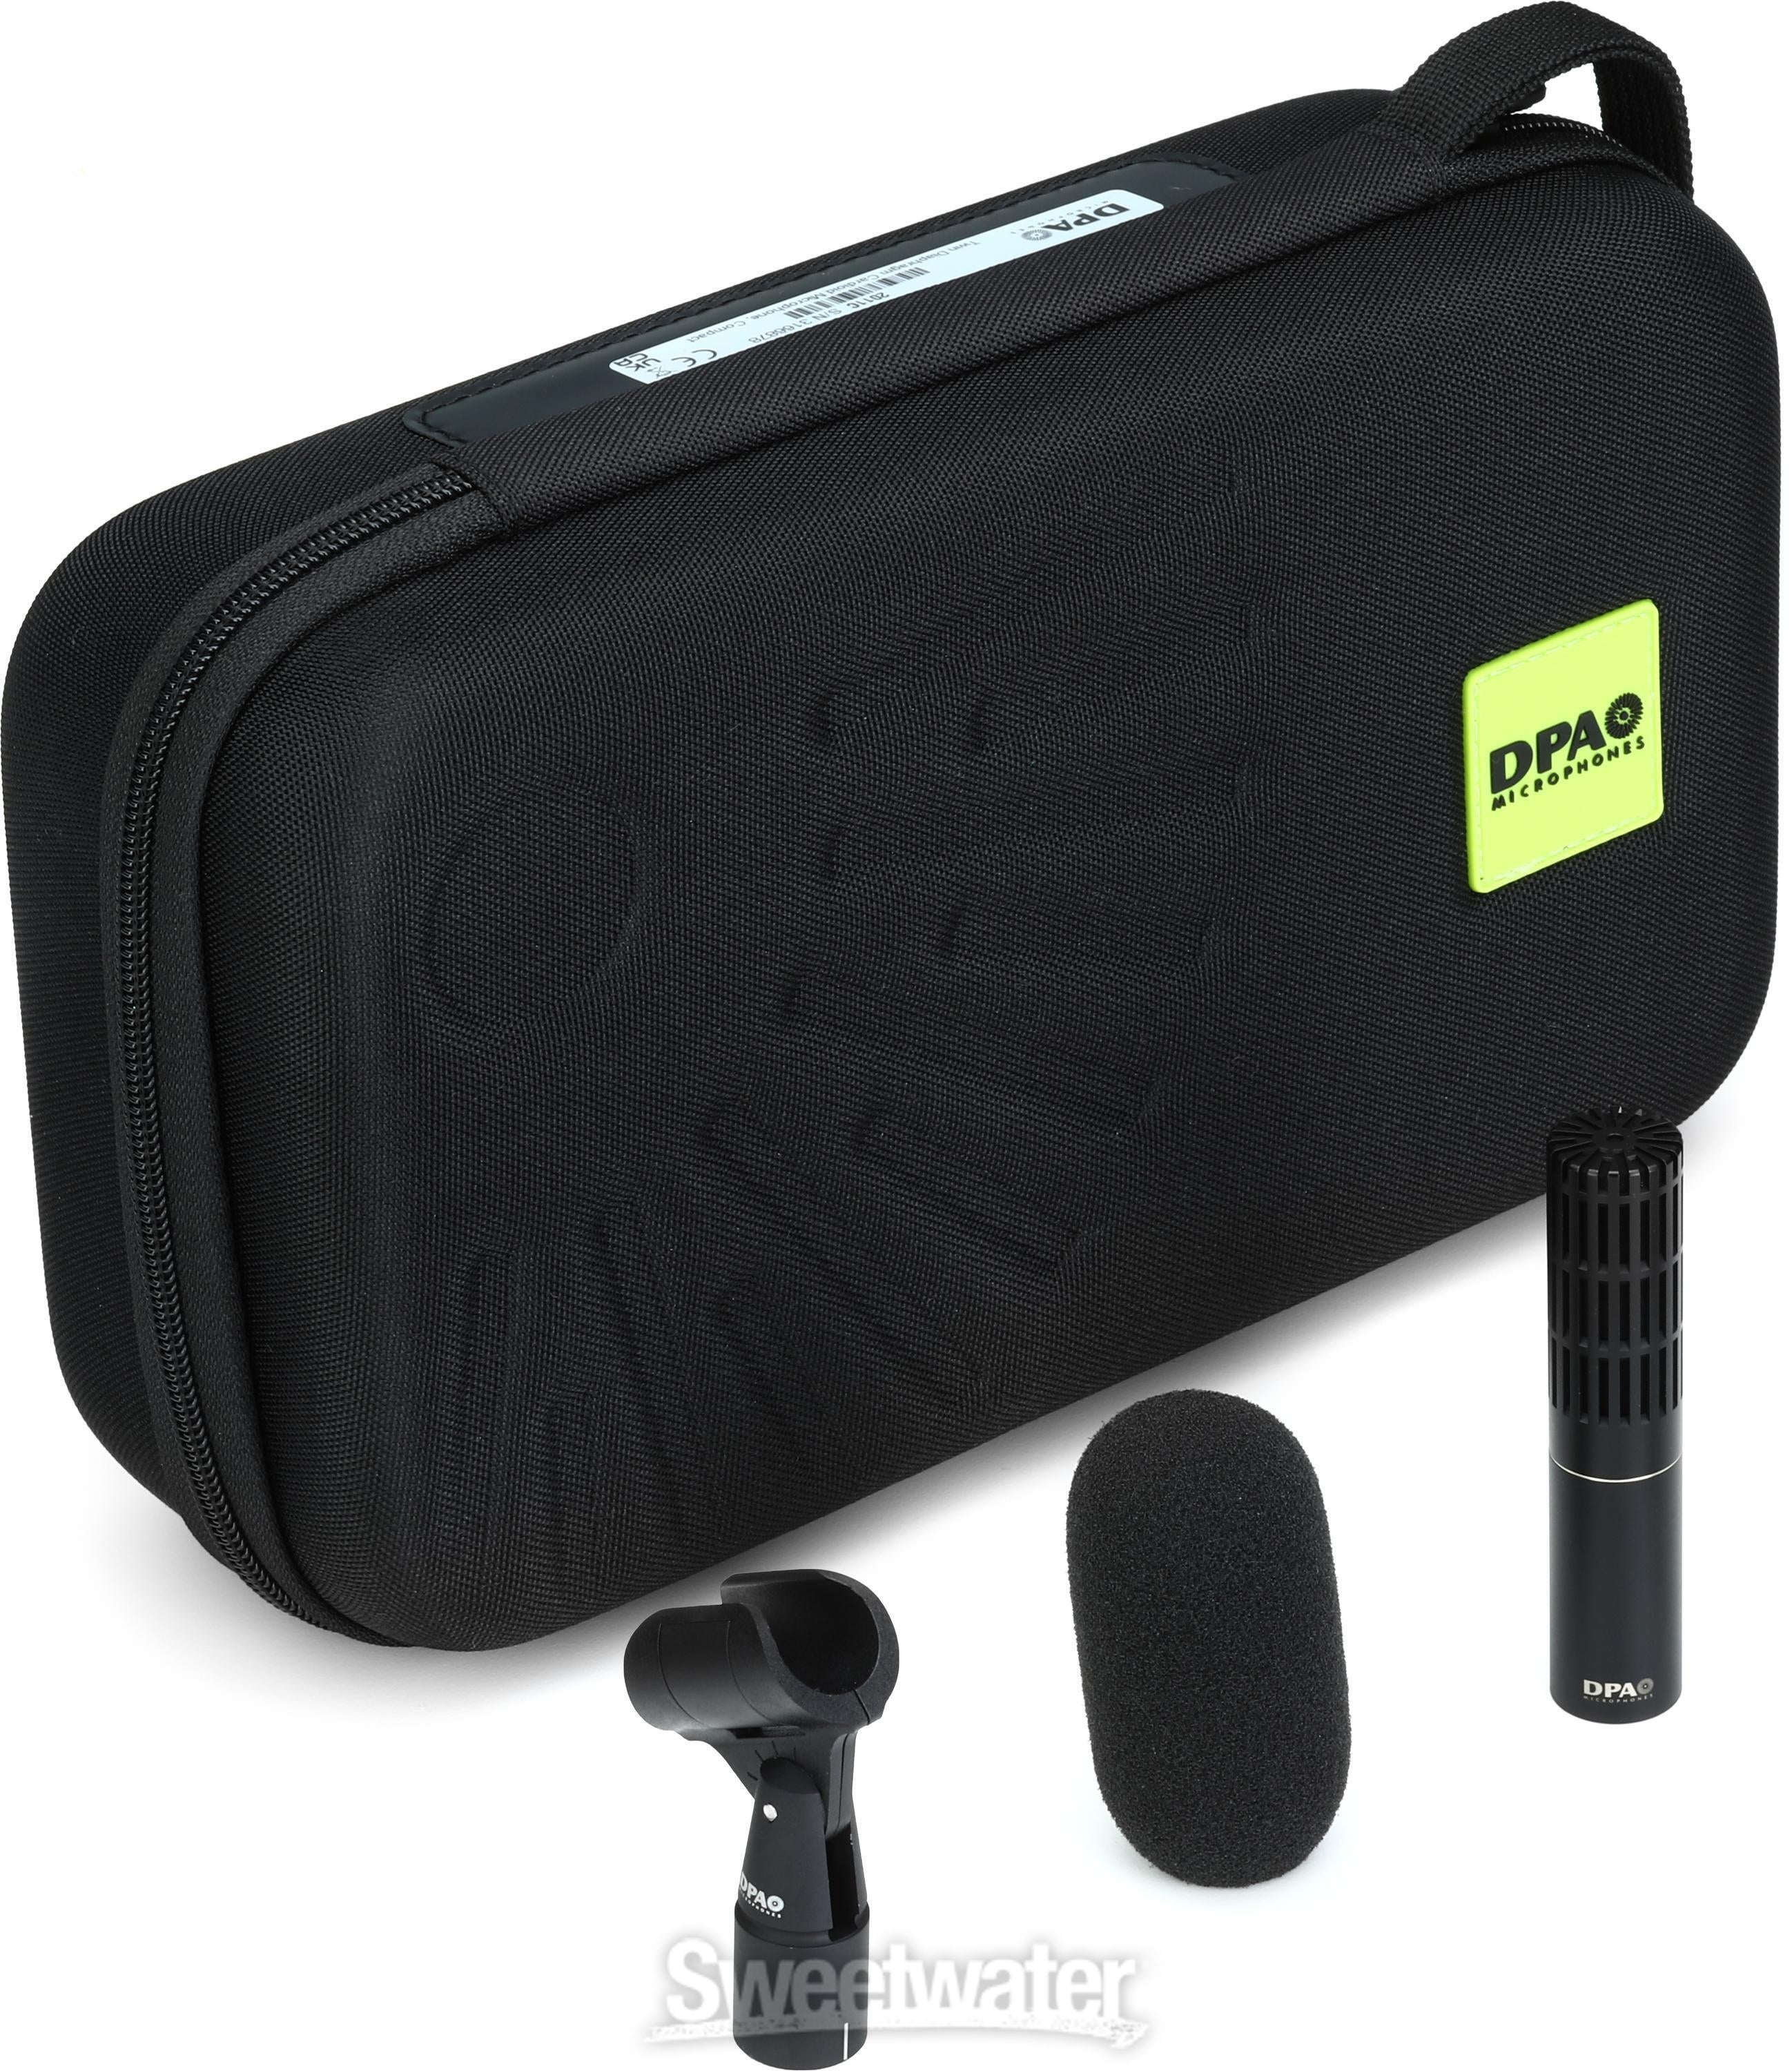 DPA 2011C Compact Twin Diaphragm Cardioid Microphone | Sweetwater